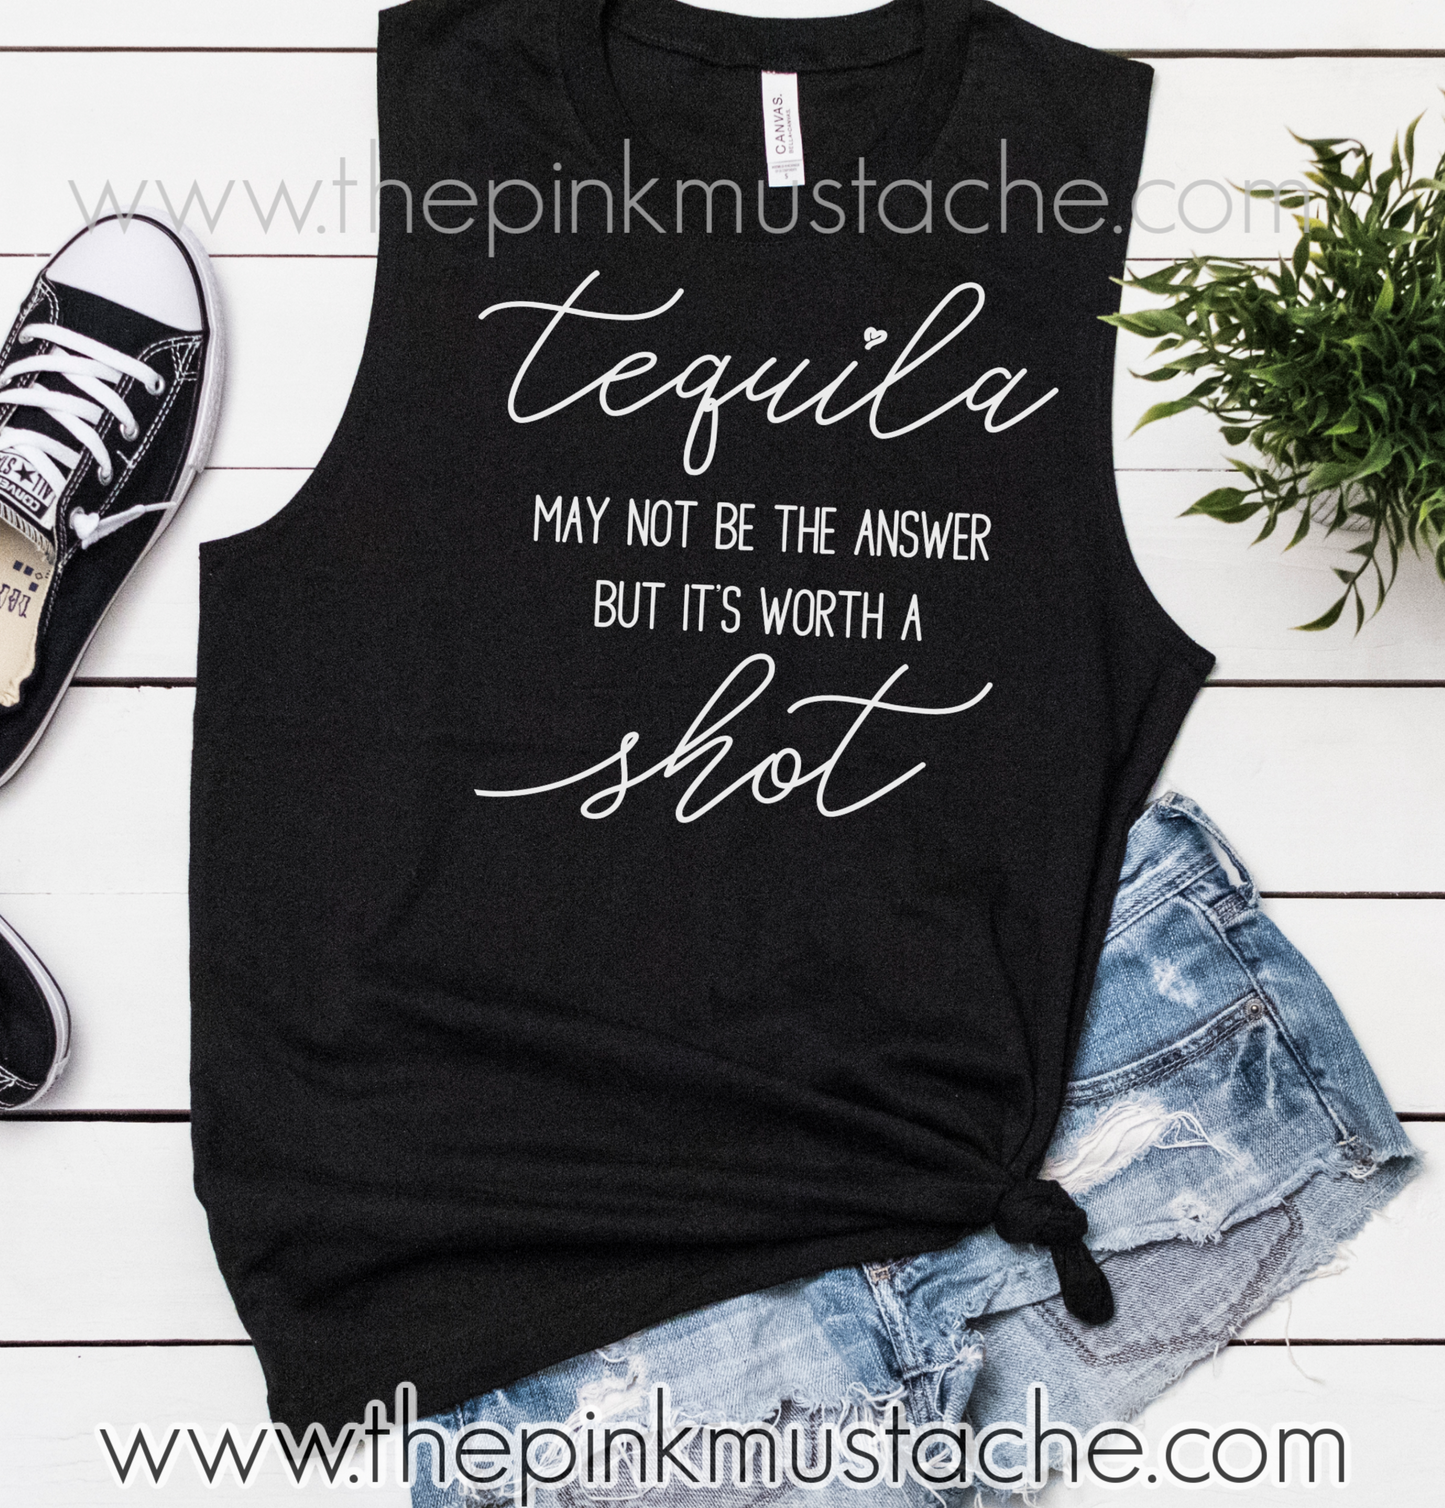 FLASH SALE - Tequila Might Not Be The Answer But It's Worth A Shot  Bella Muscle Tank, Cropped Tank, or Tee/ Quarantine Life / Funny Shirts